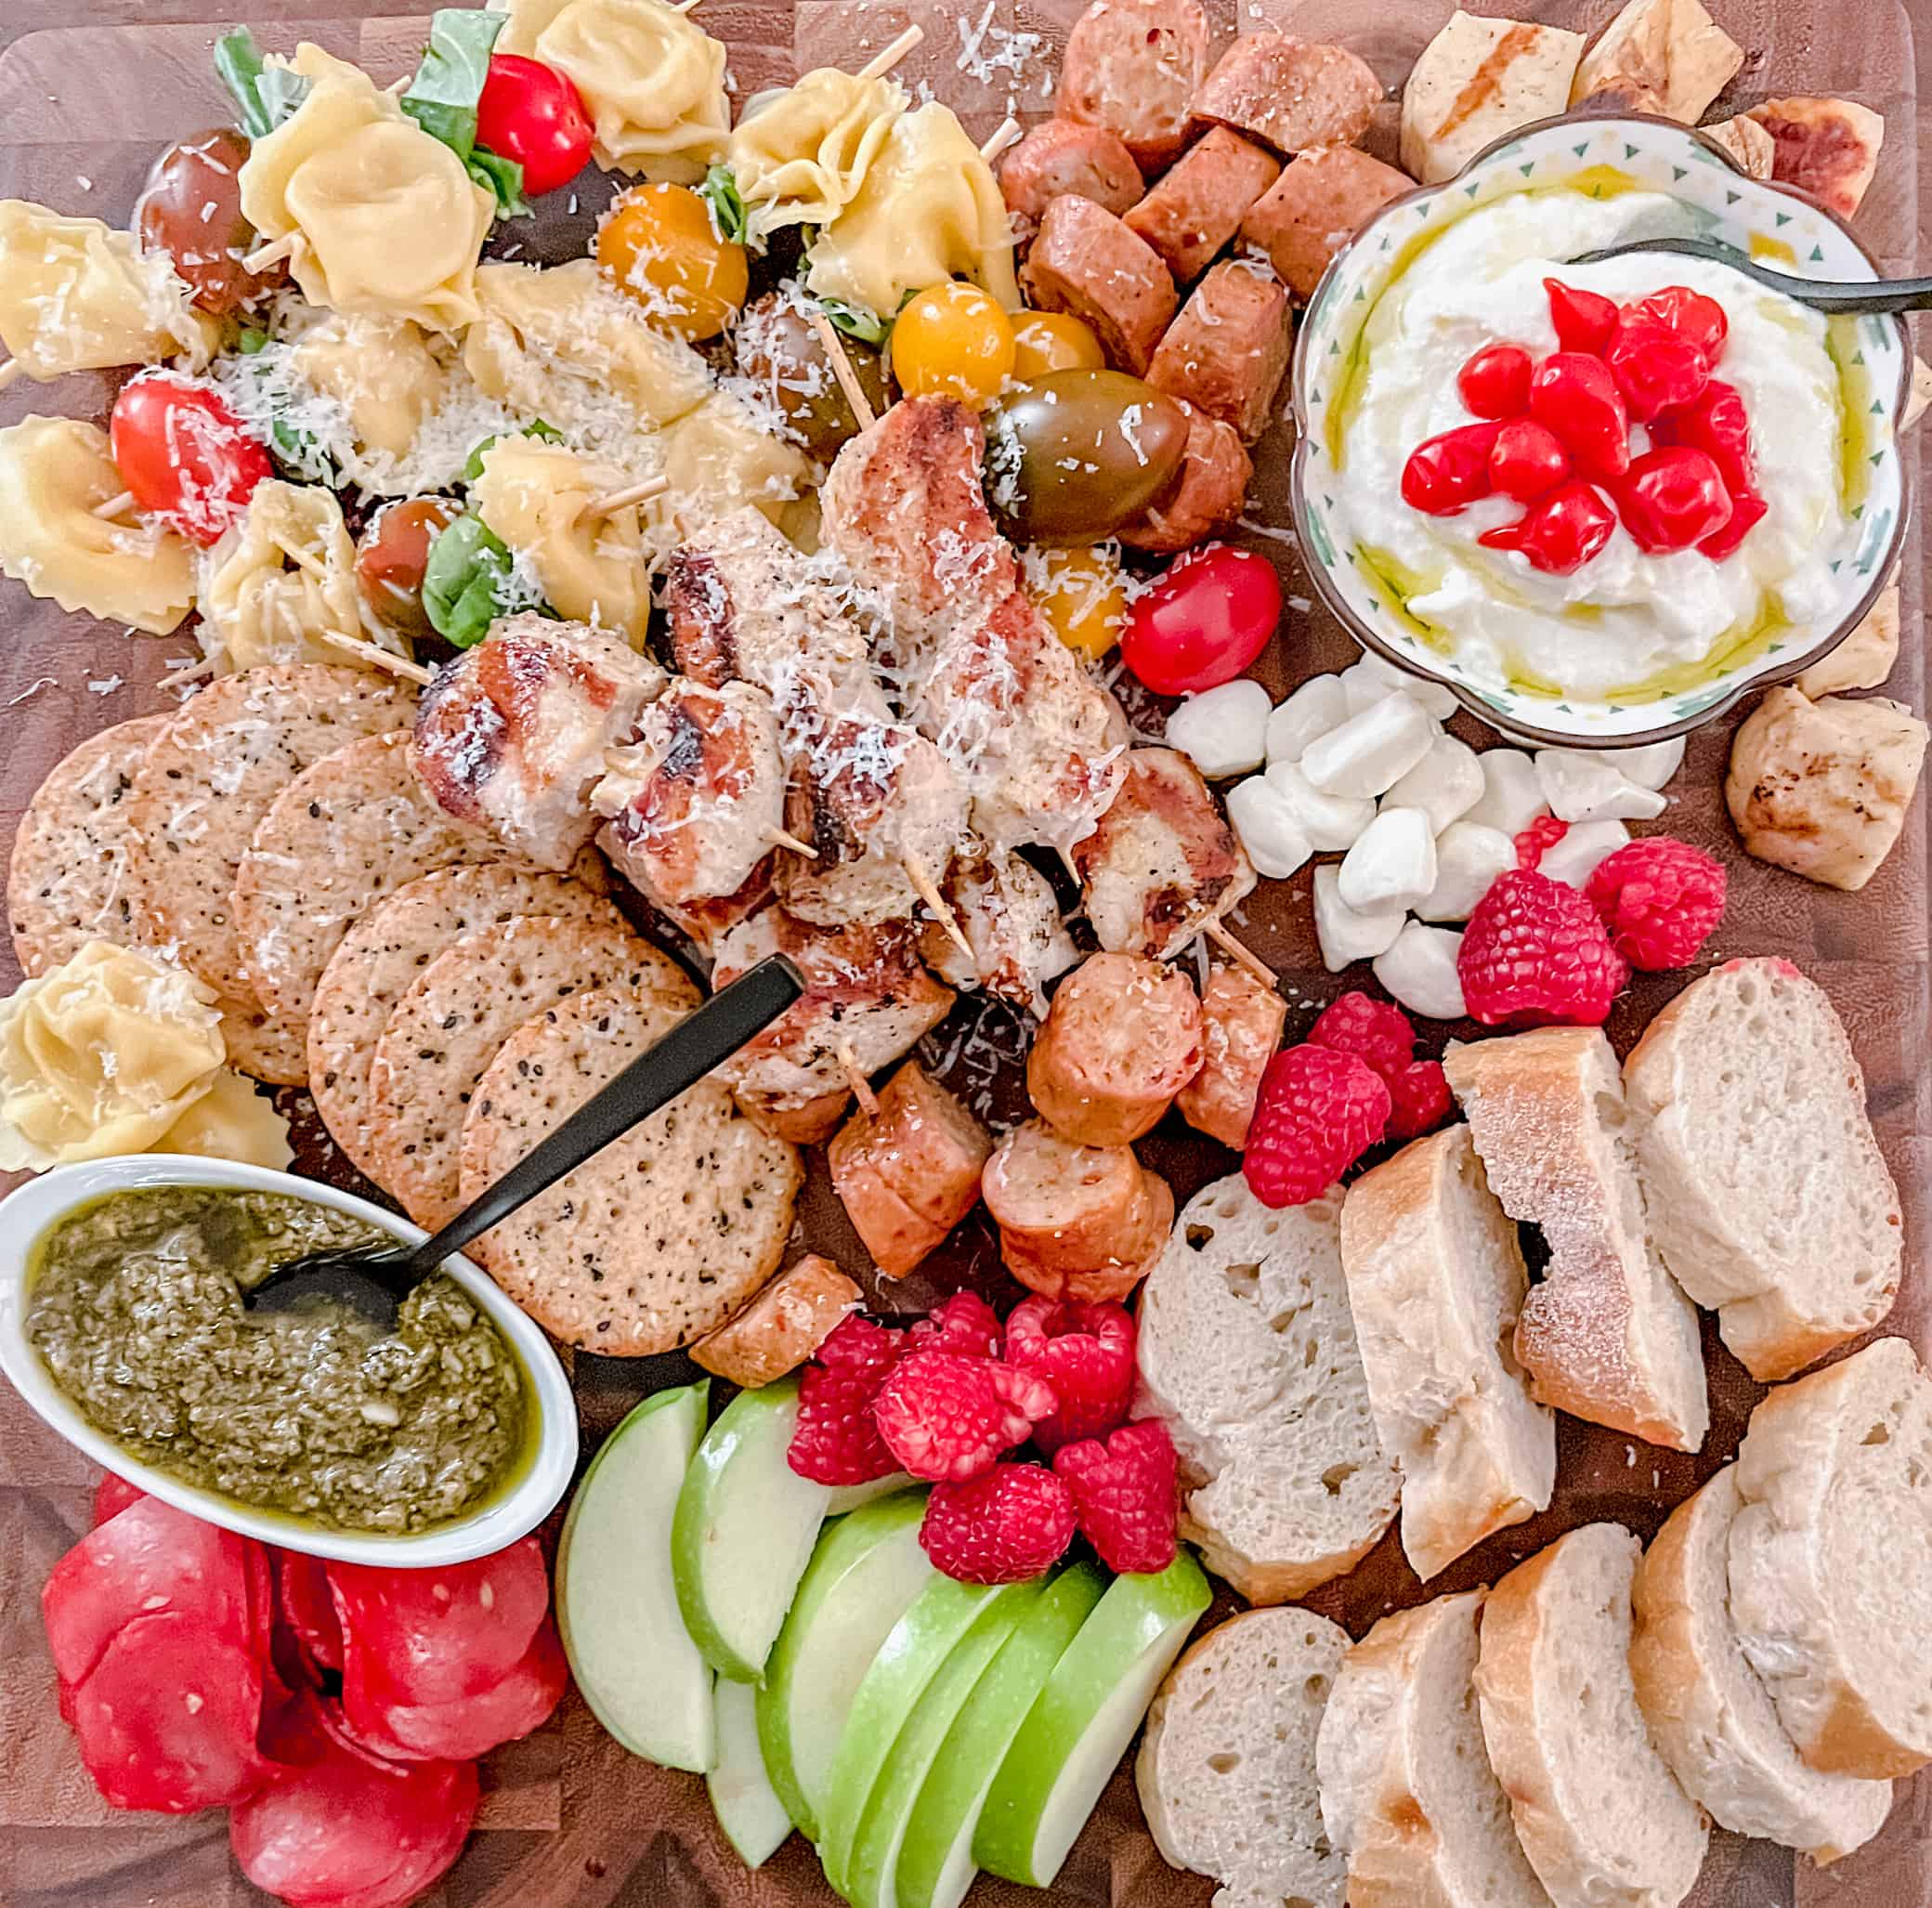 How To Build a Pork Free Charcuterie Board